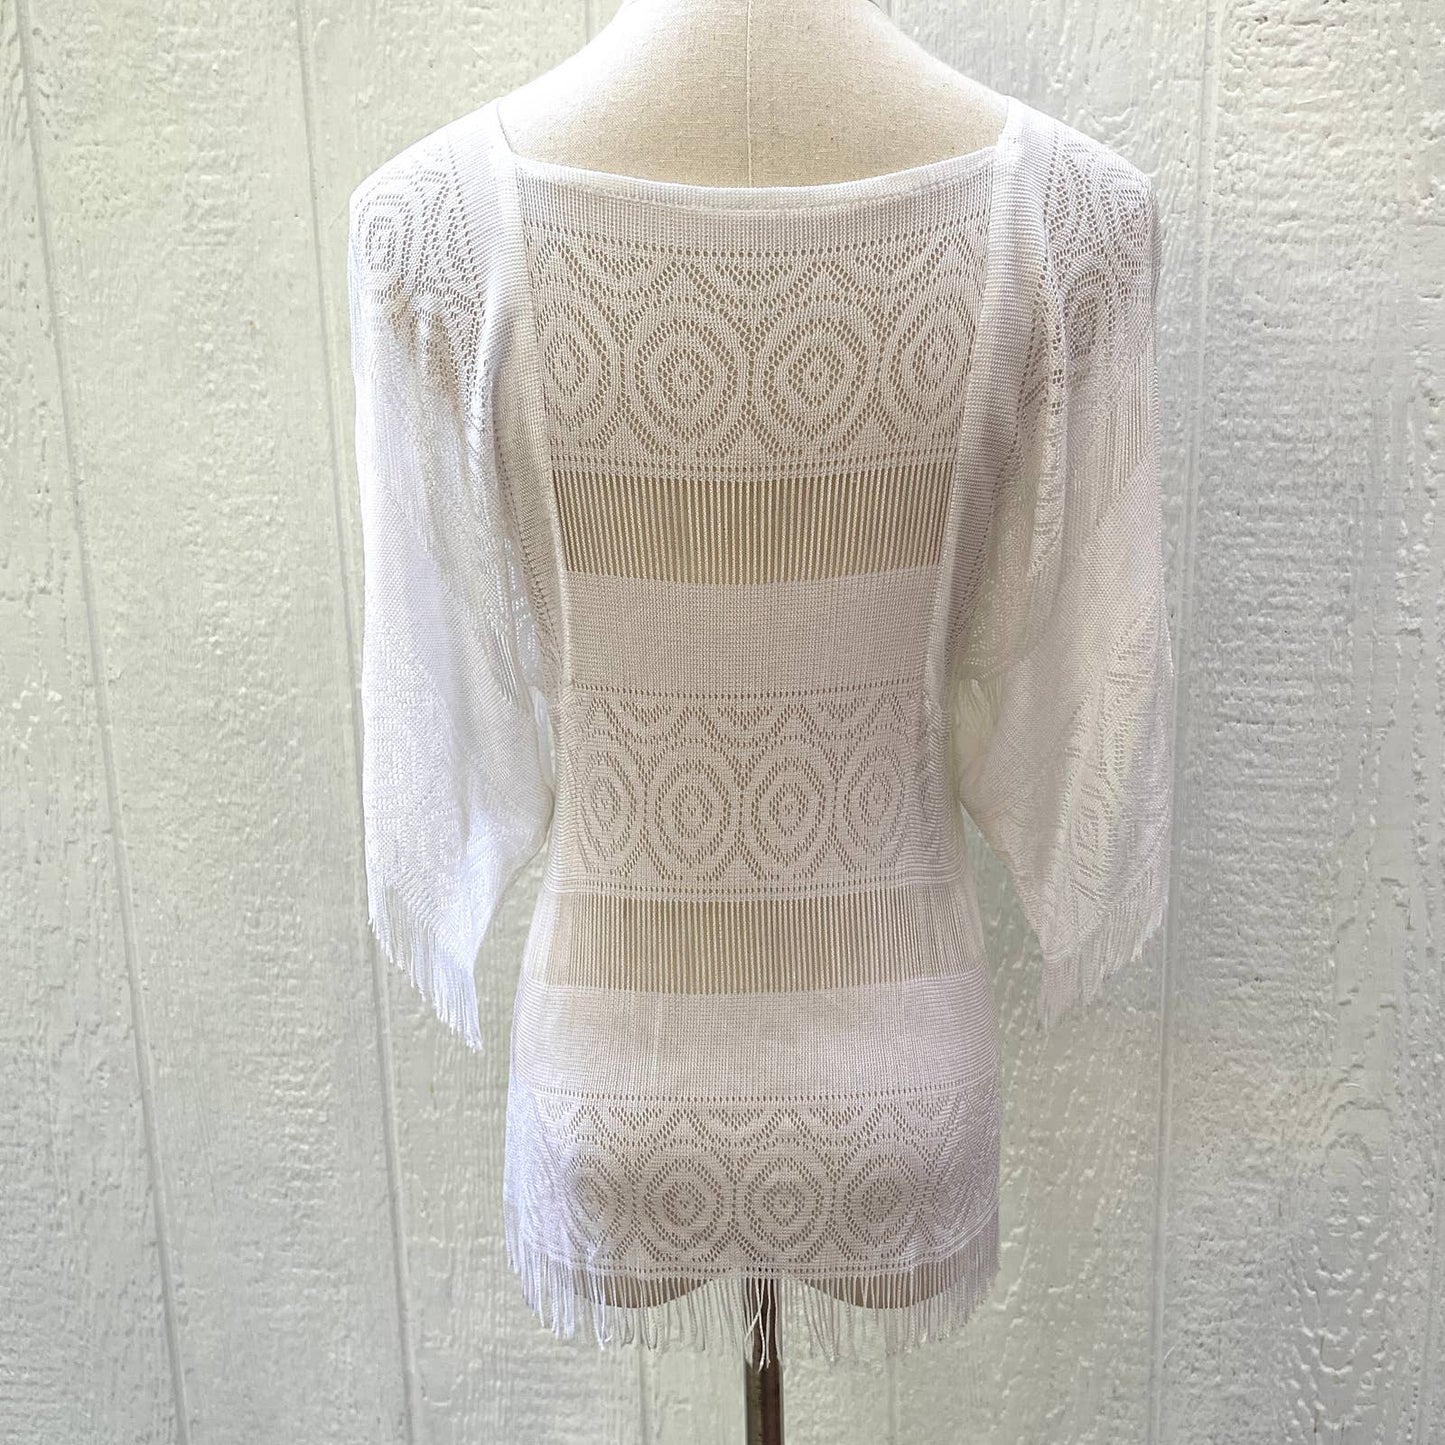 Vintage 70s Fringed Crochet Top Off White Open Knit Hippy Vibes Size S M